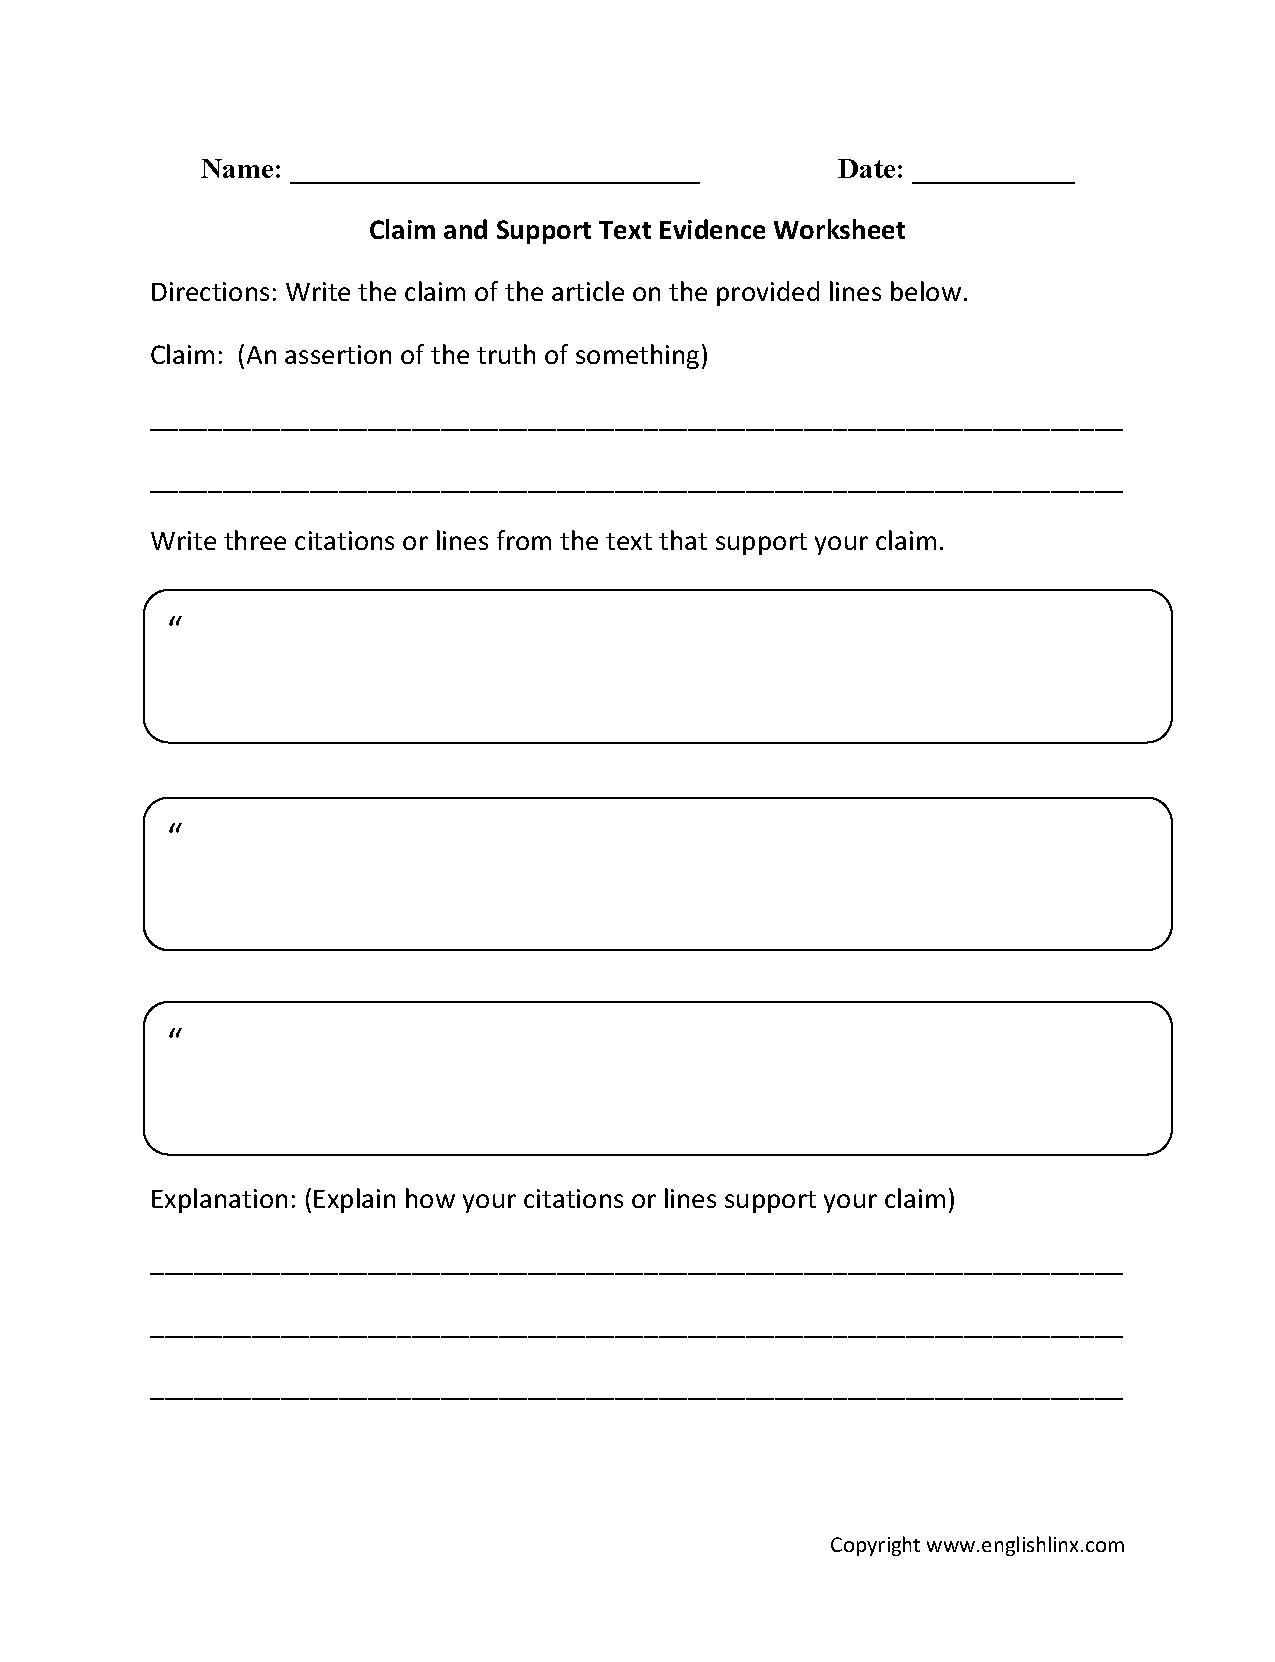 Citing Textual Evidence Worksheet Unique Textual Evidence Worksheet